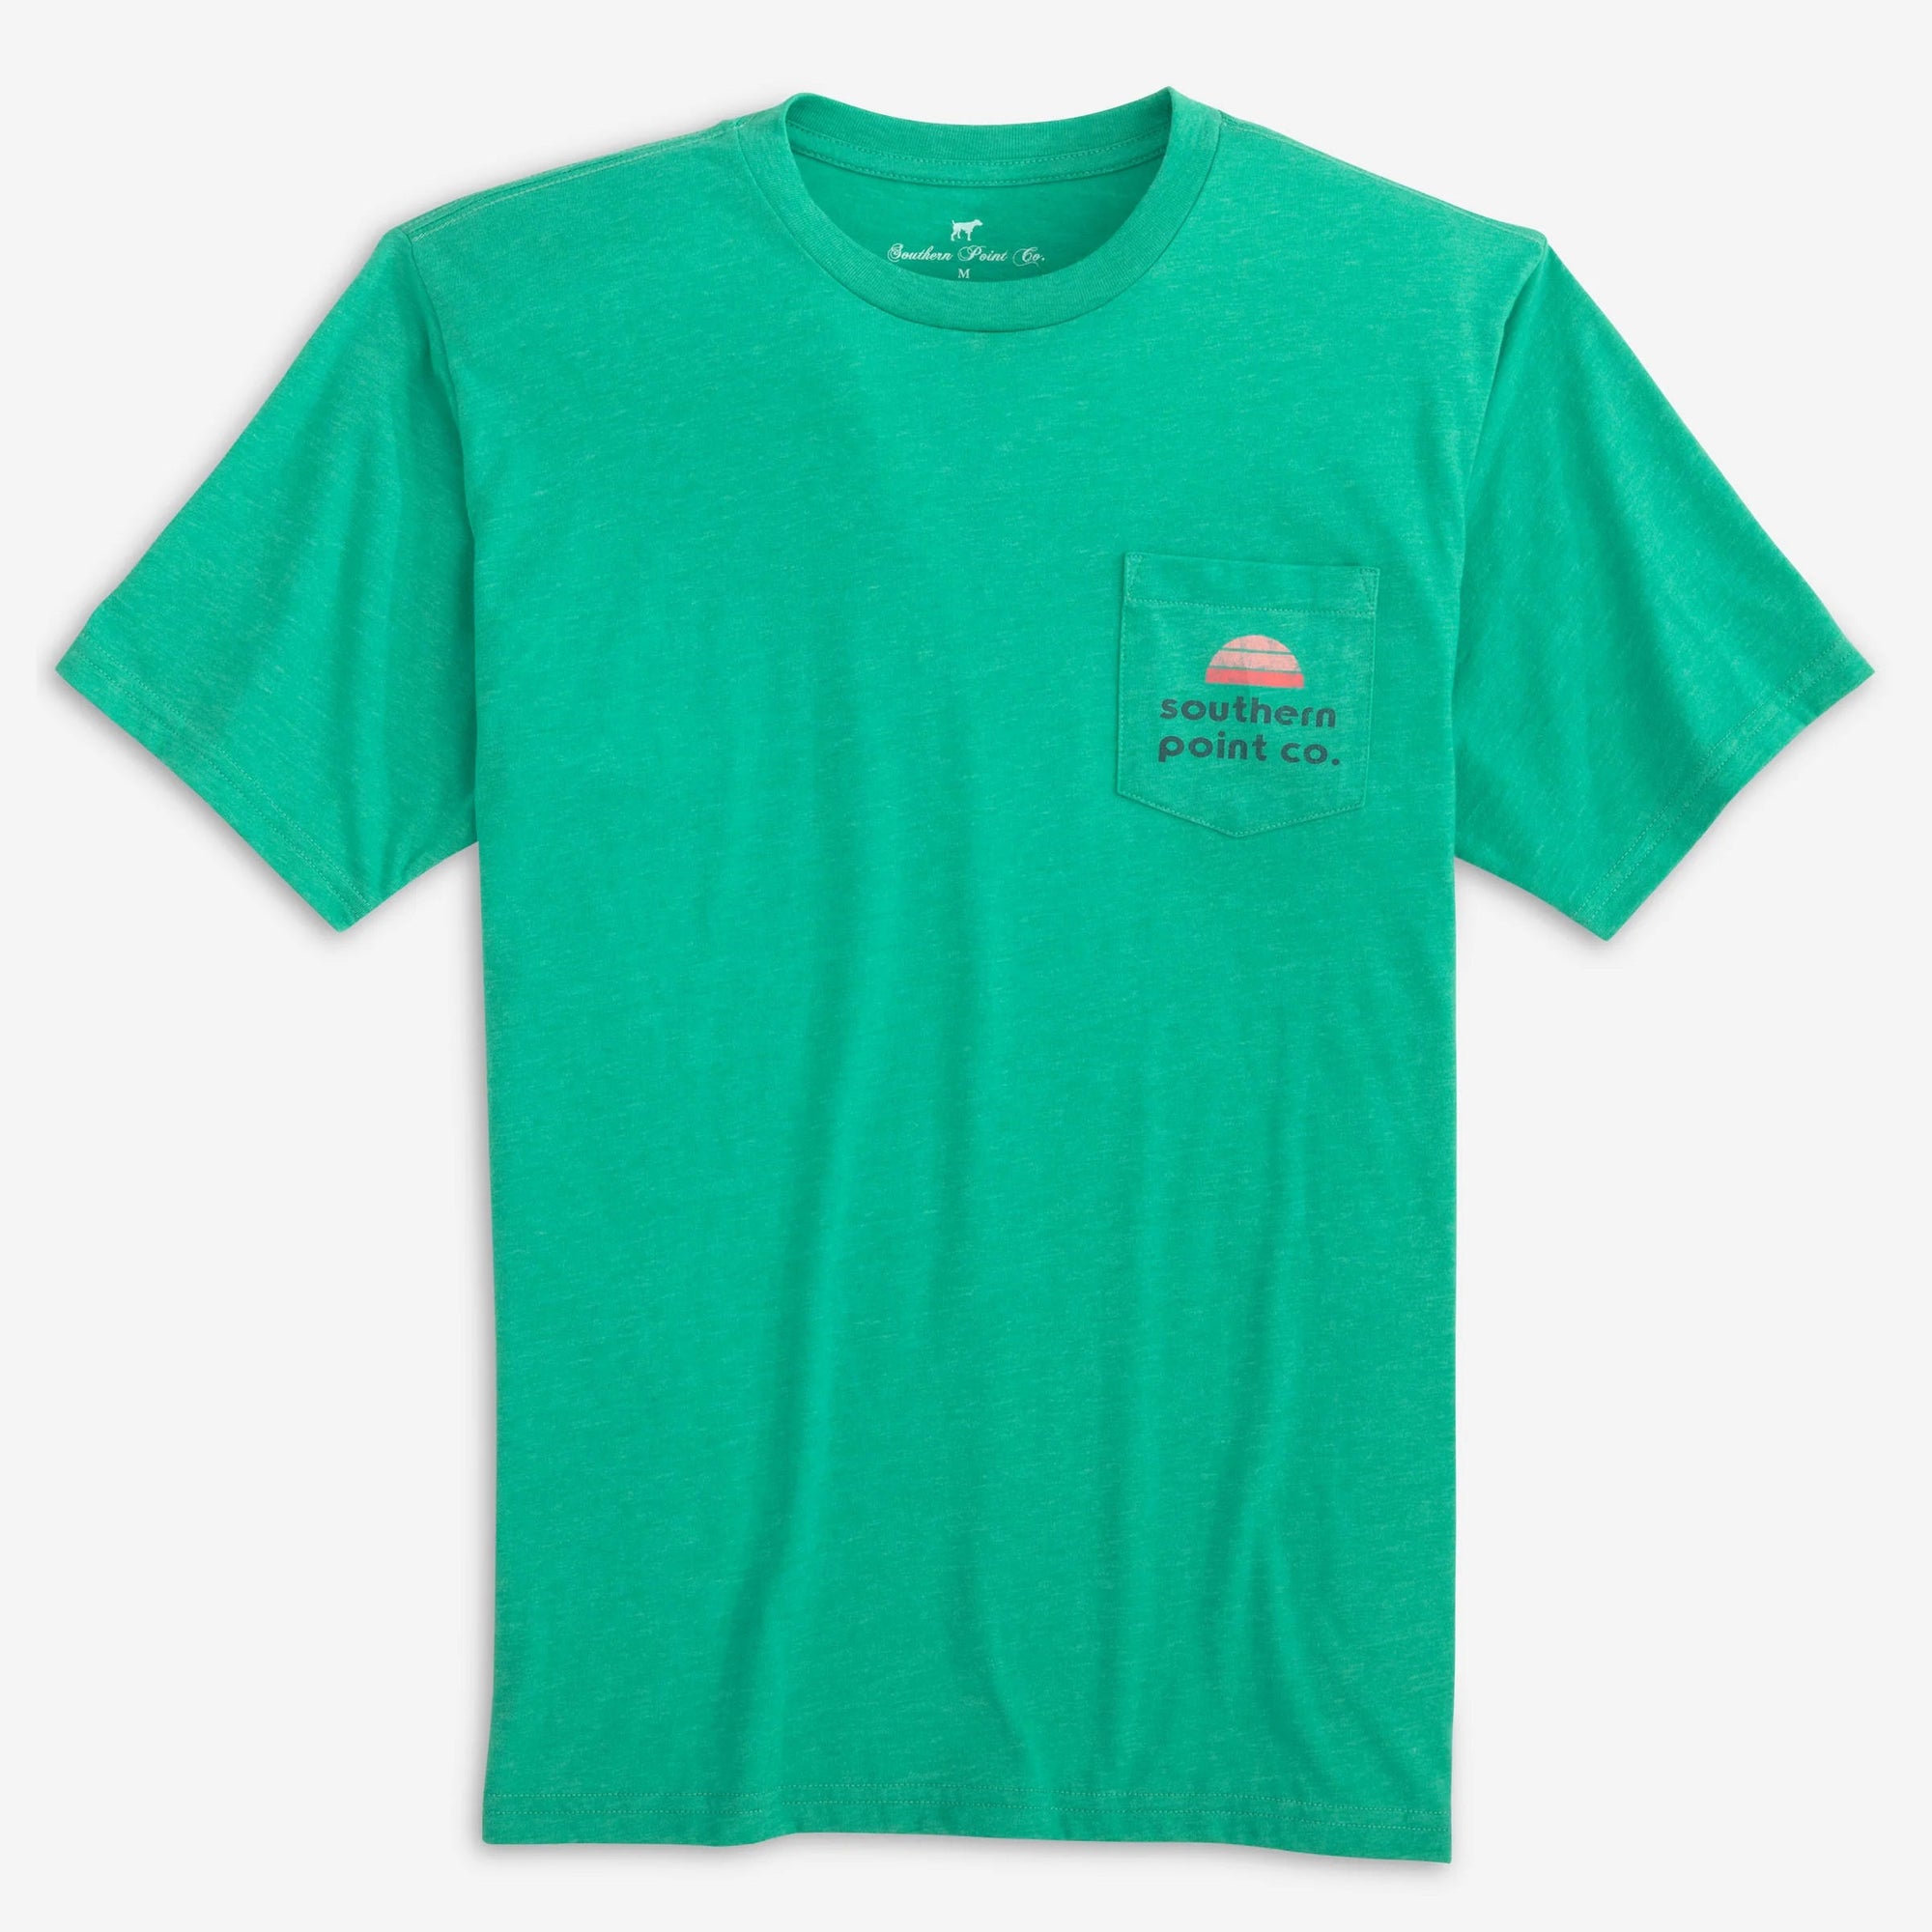 Southern Point Co. Men's Tees Southern Point Sunset Palm Tee || David's Clothing